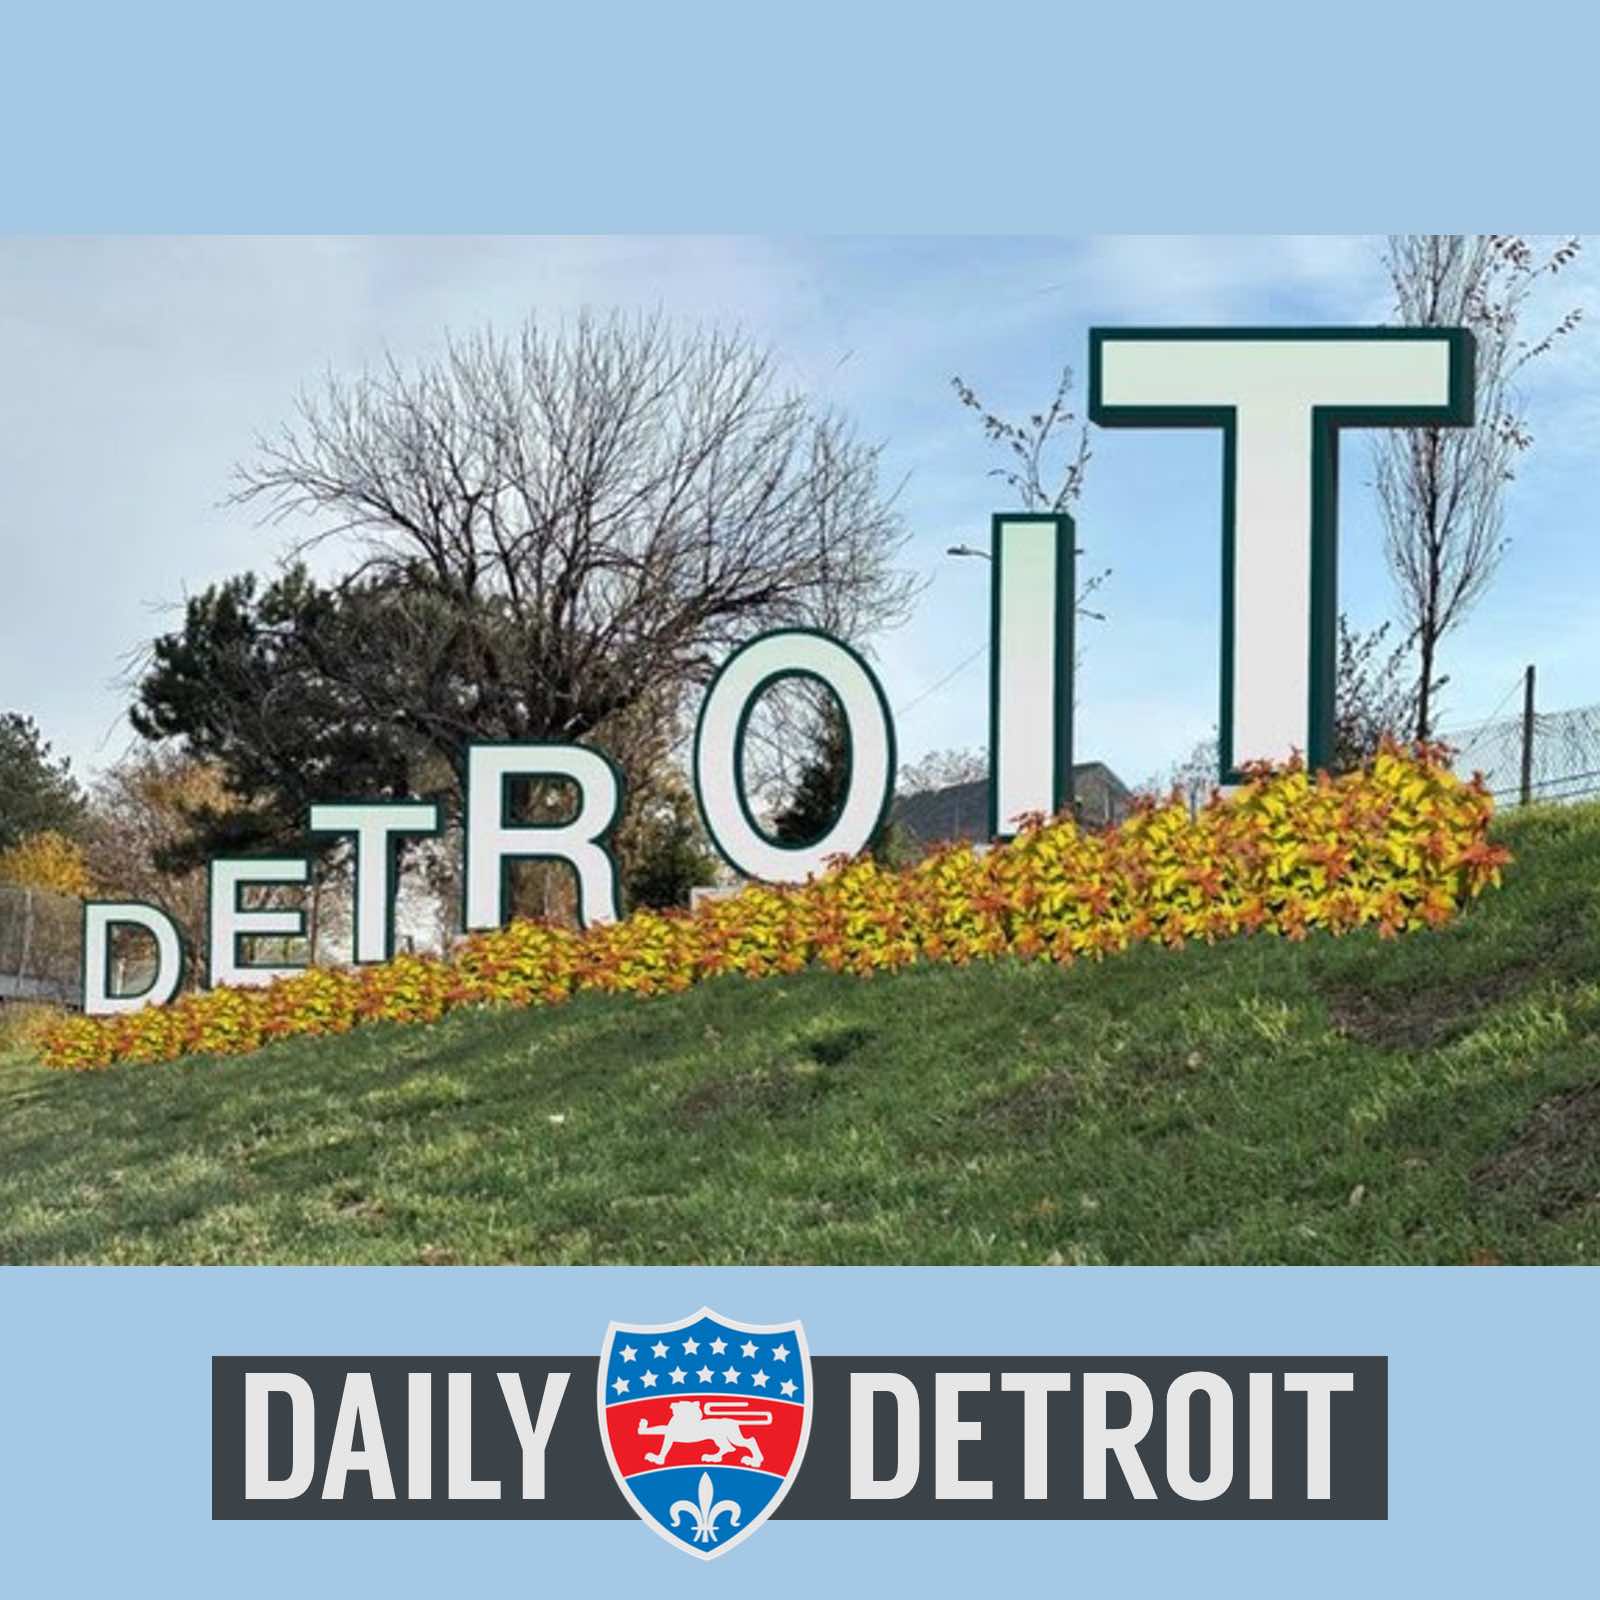 On Detroit's new "Hollywood" sign // Pie Sci, IKEA and Canton